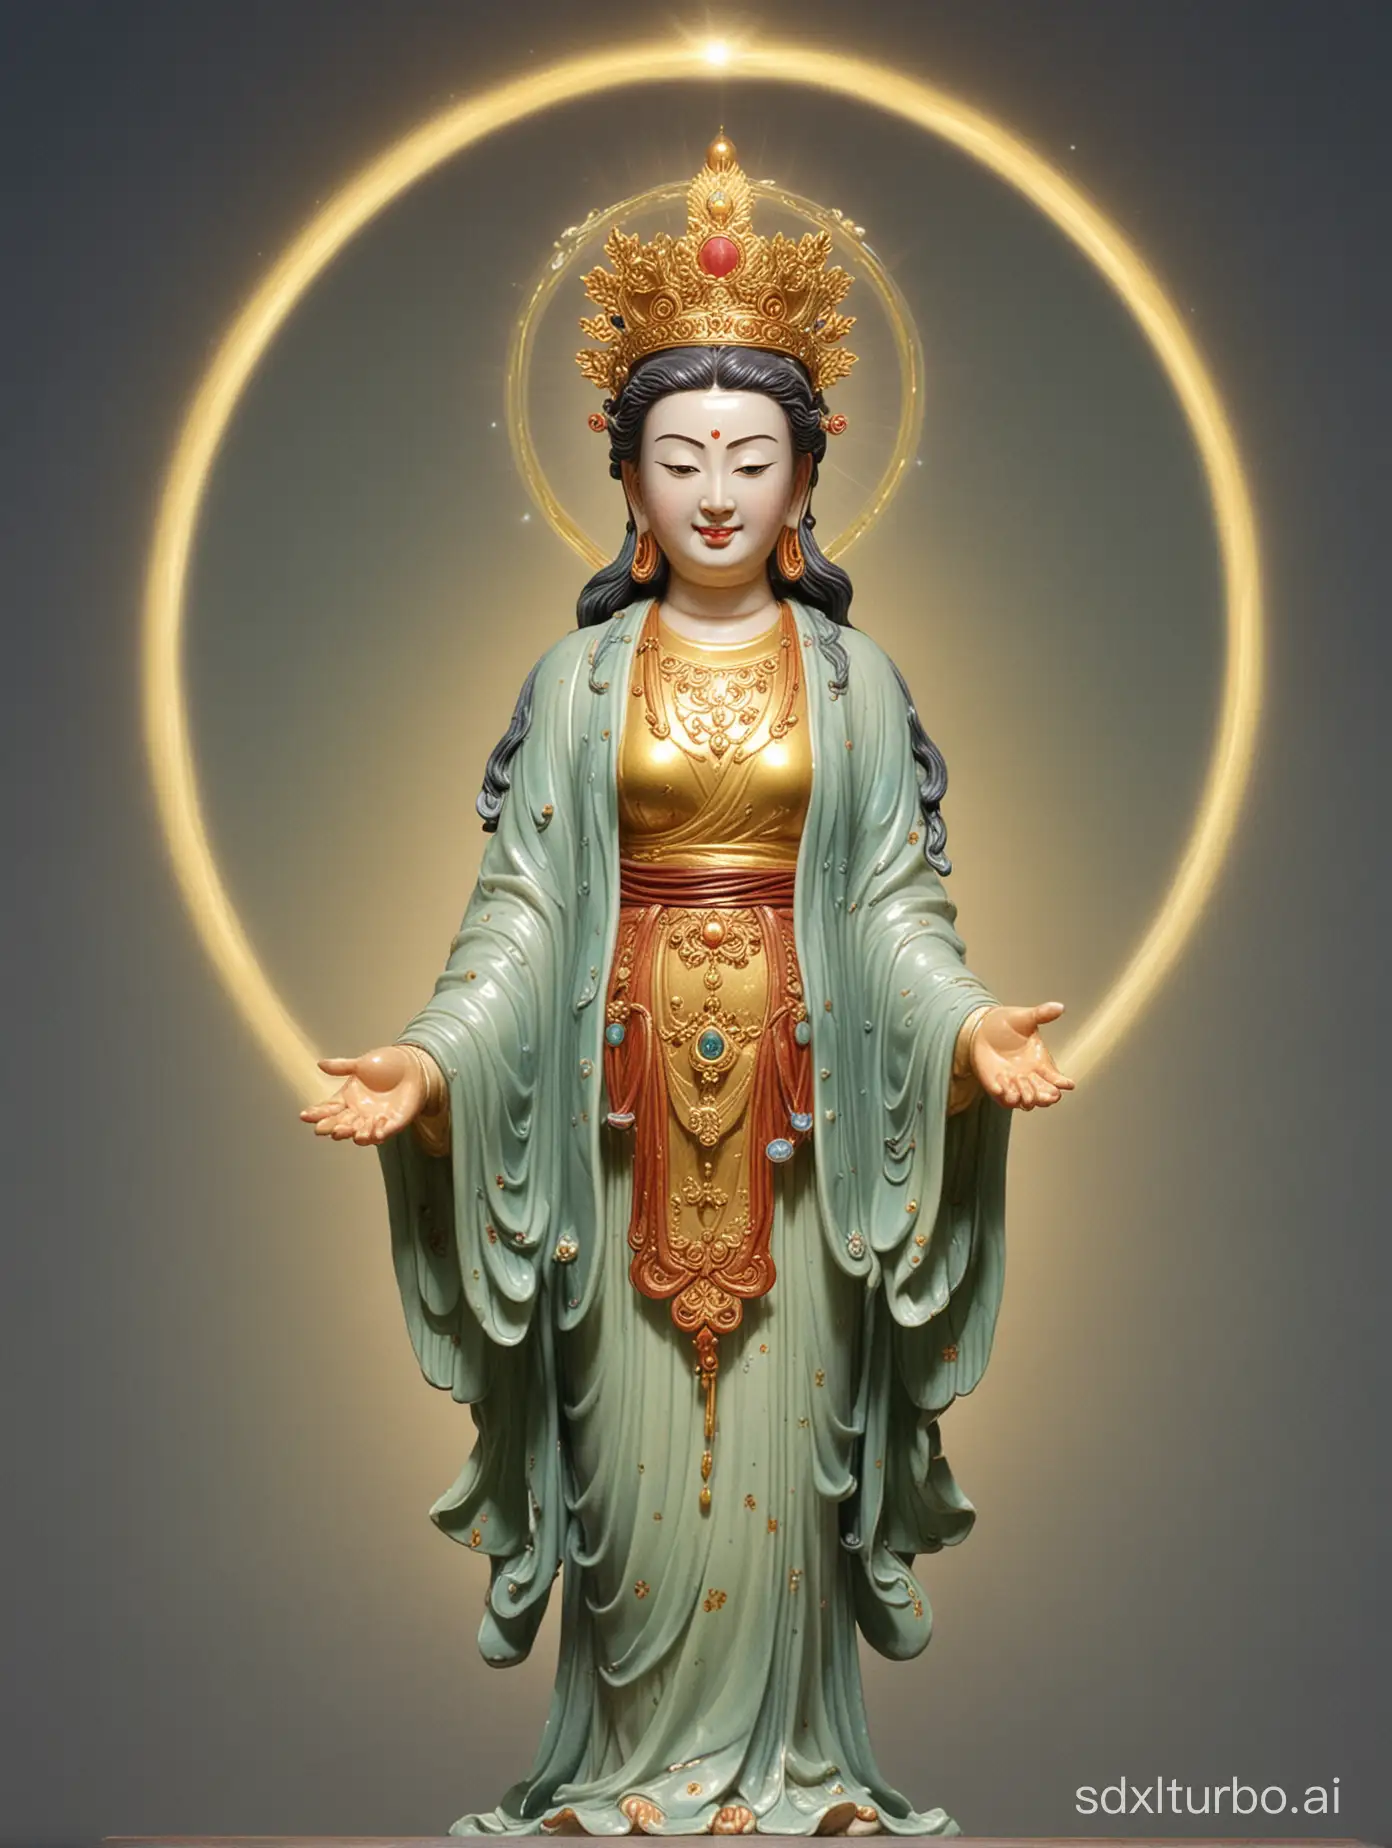 Smiling-Guanyin-Bodhisattva-Standing-with-Radiant-Halo